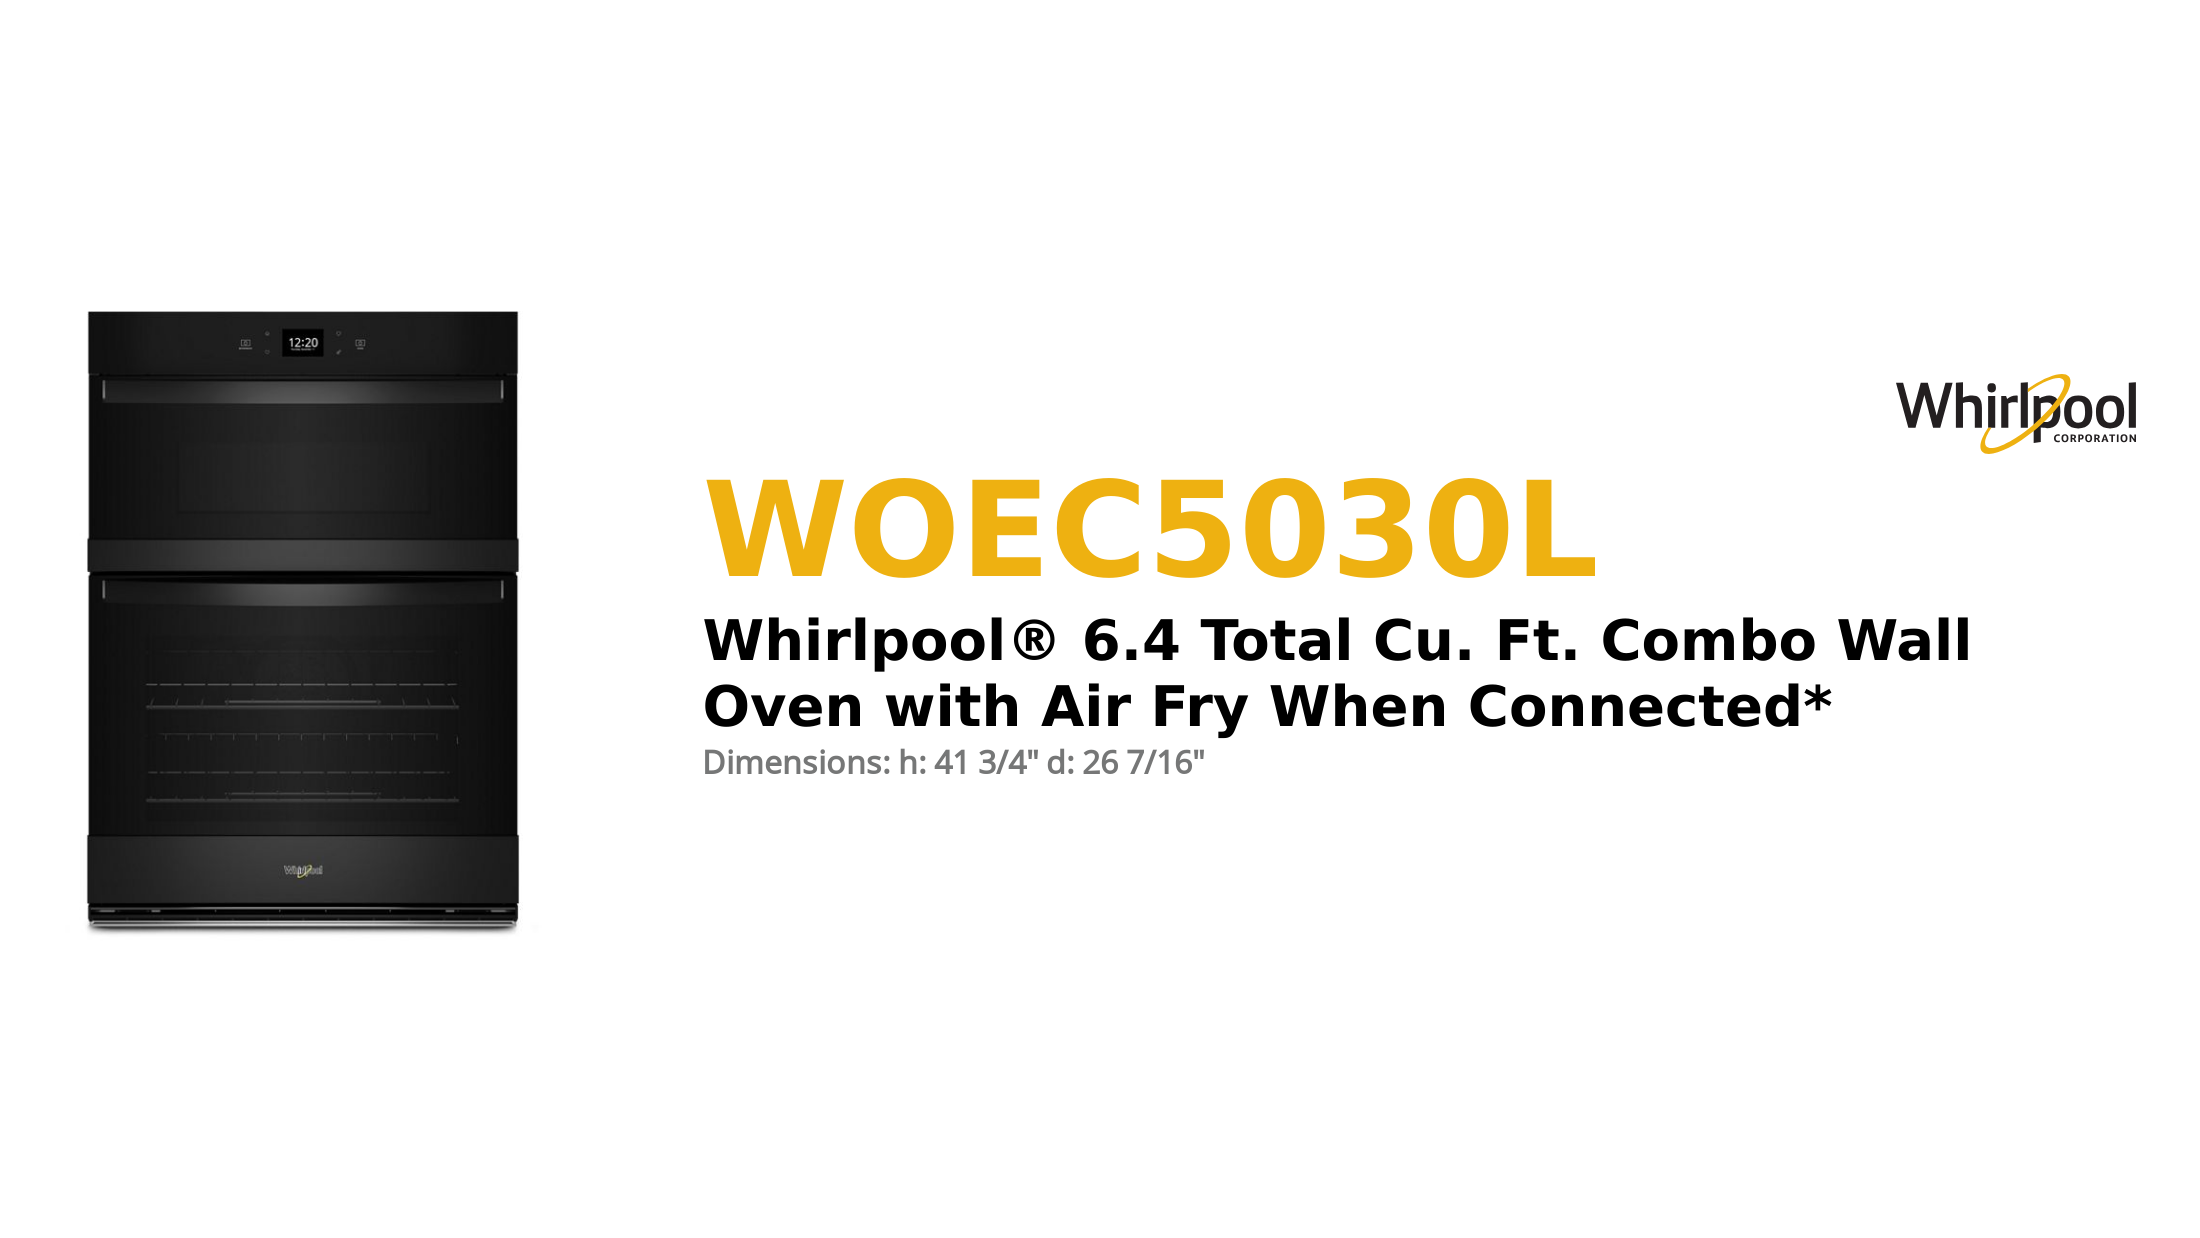 



WHIRLPOOL® 6.4 TOTAL CU. FT. COMBO WALL OVEN WITH AIR FRY WHEN CONNECTED*



